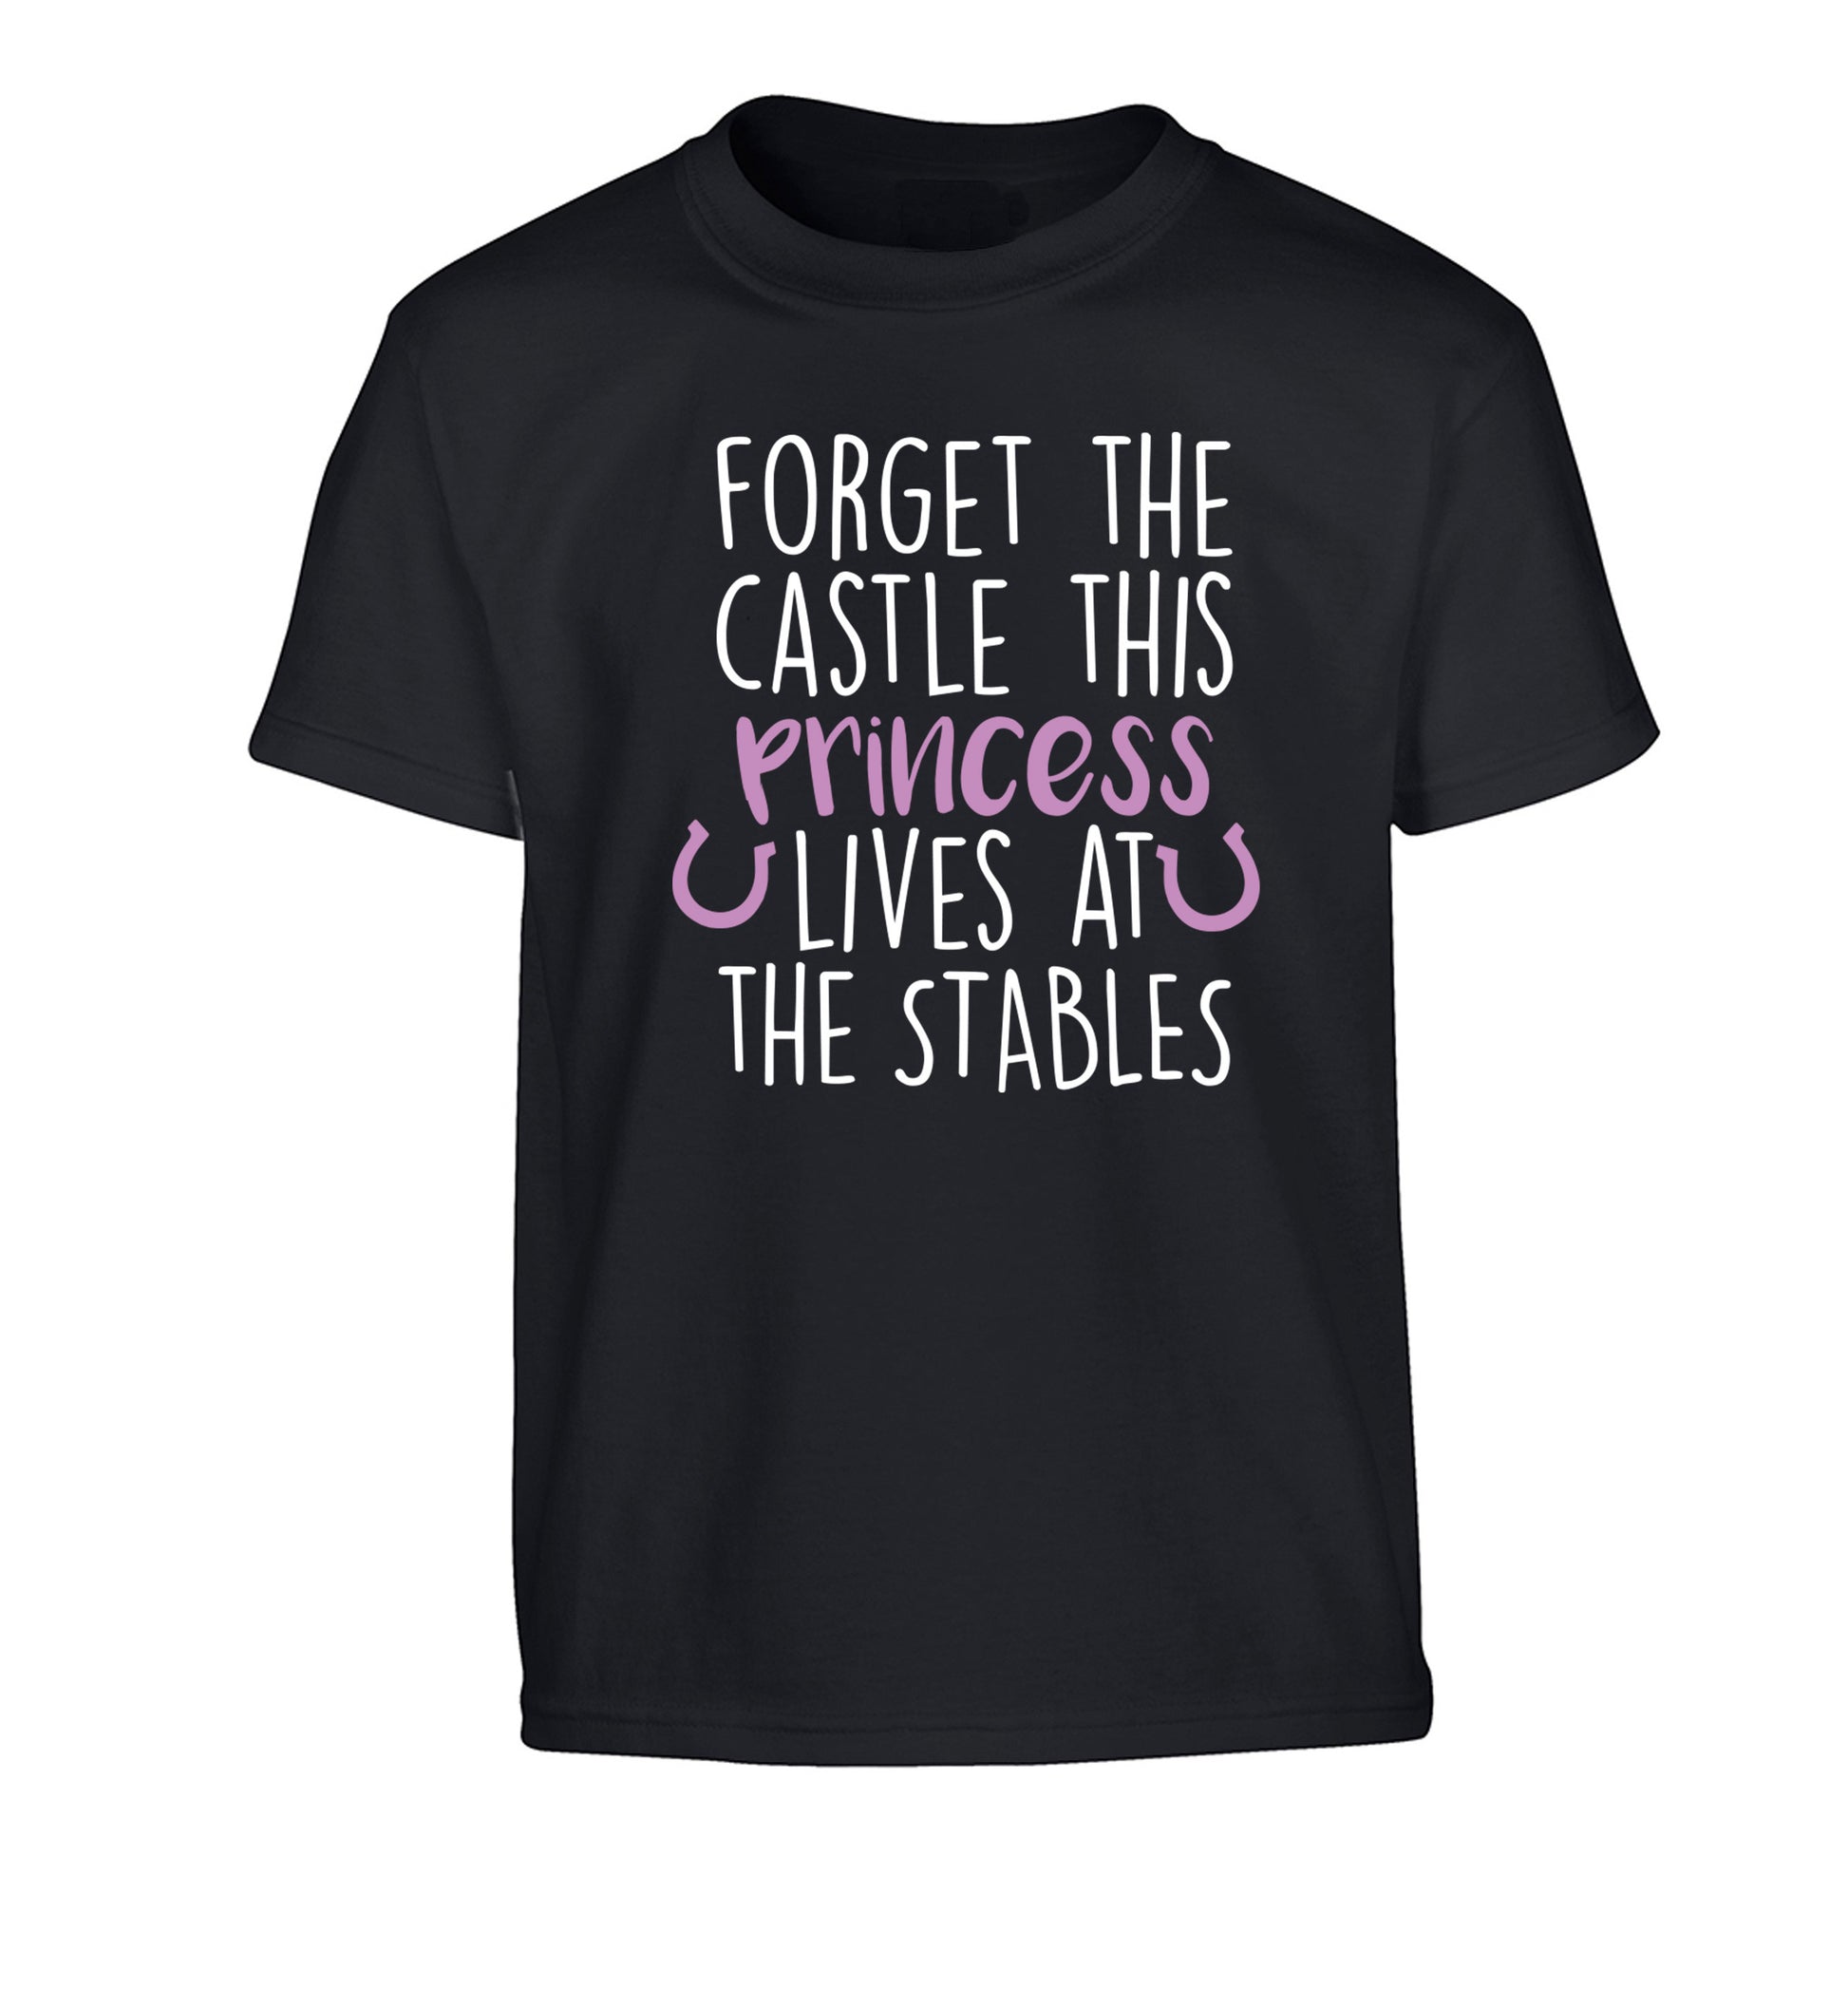 Forget the castle this princess lives at the stables Children's black Tshirt 12-14 Years